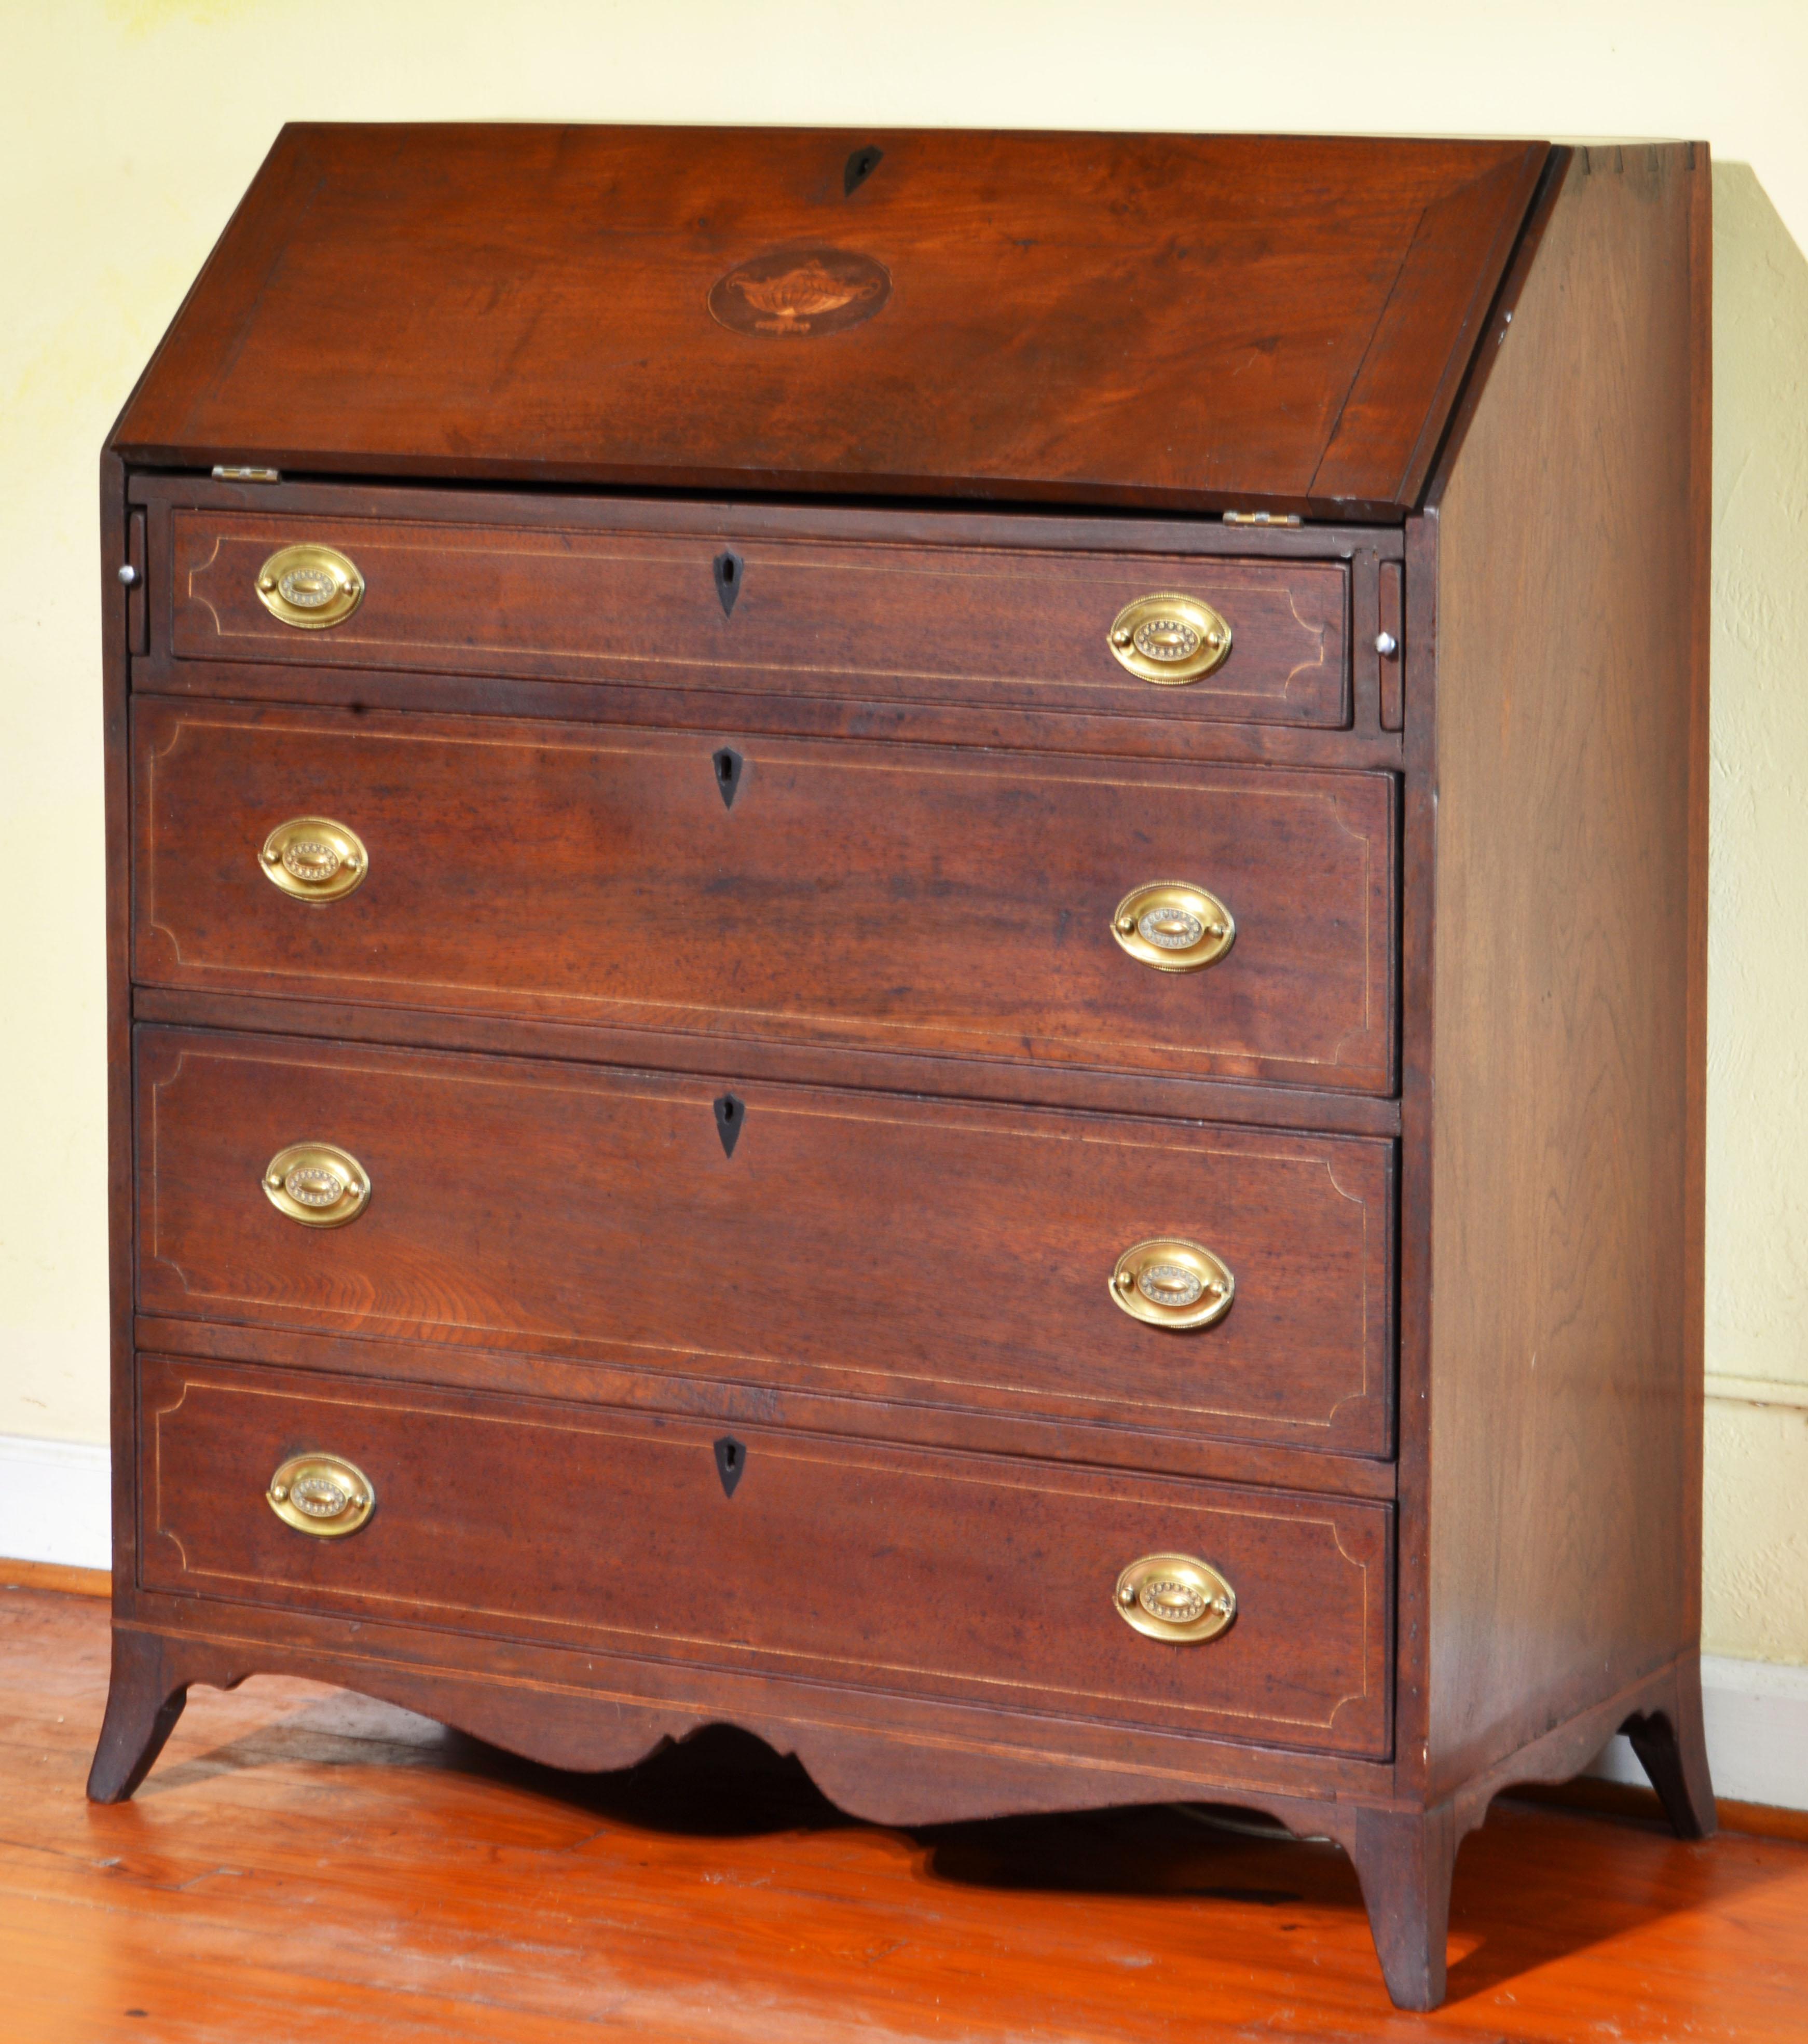 This Southern Federal solid walnut desk, dating to circa 1800-1820 and made in the Piedmont Region of Virginia, features a stringed slant front centering an inlaid classical style motif that opens up to an interior fitted with pigeon holes and four